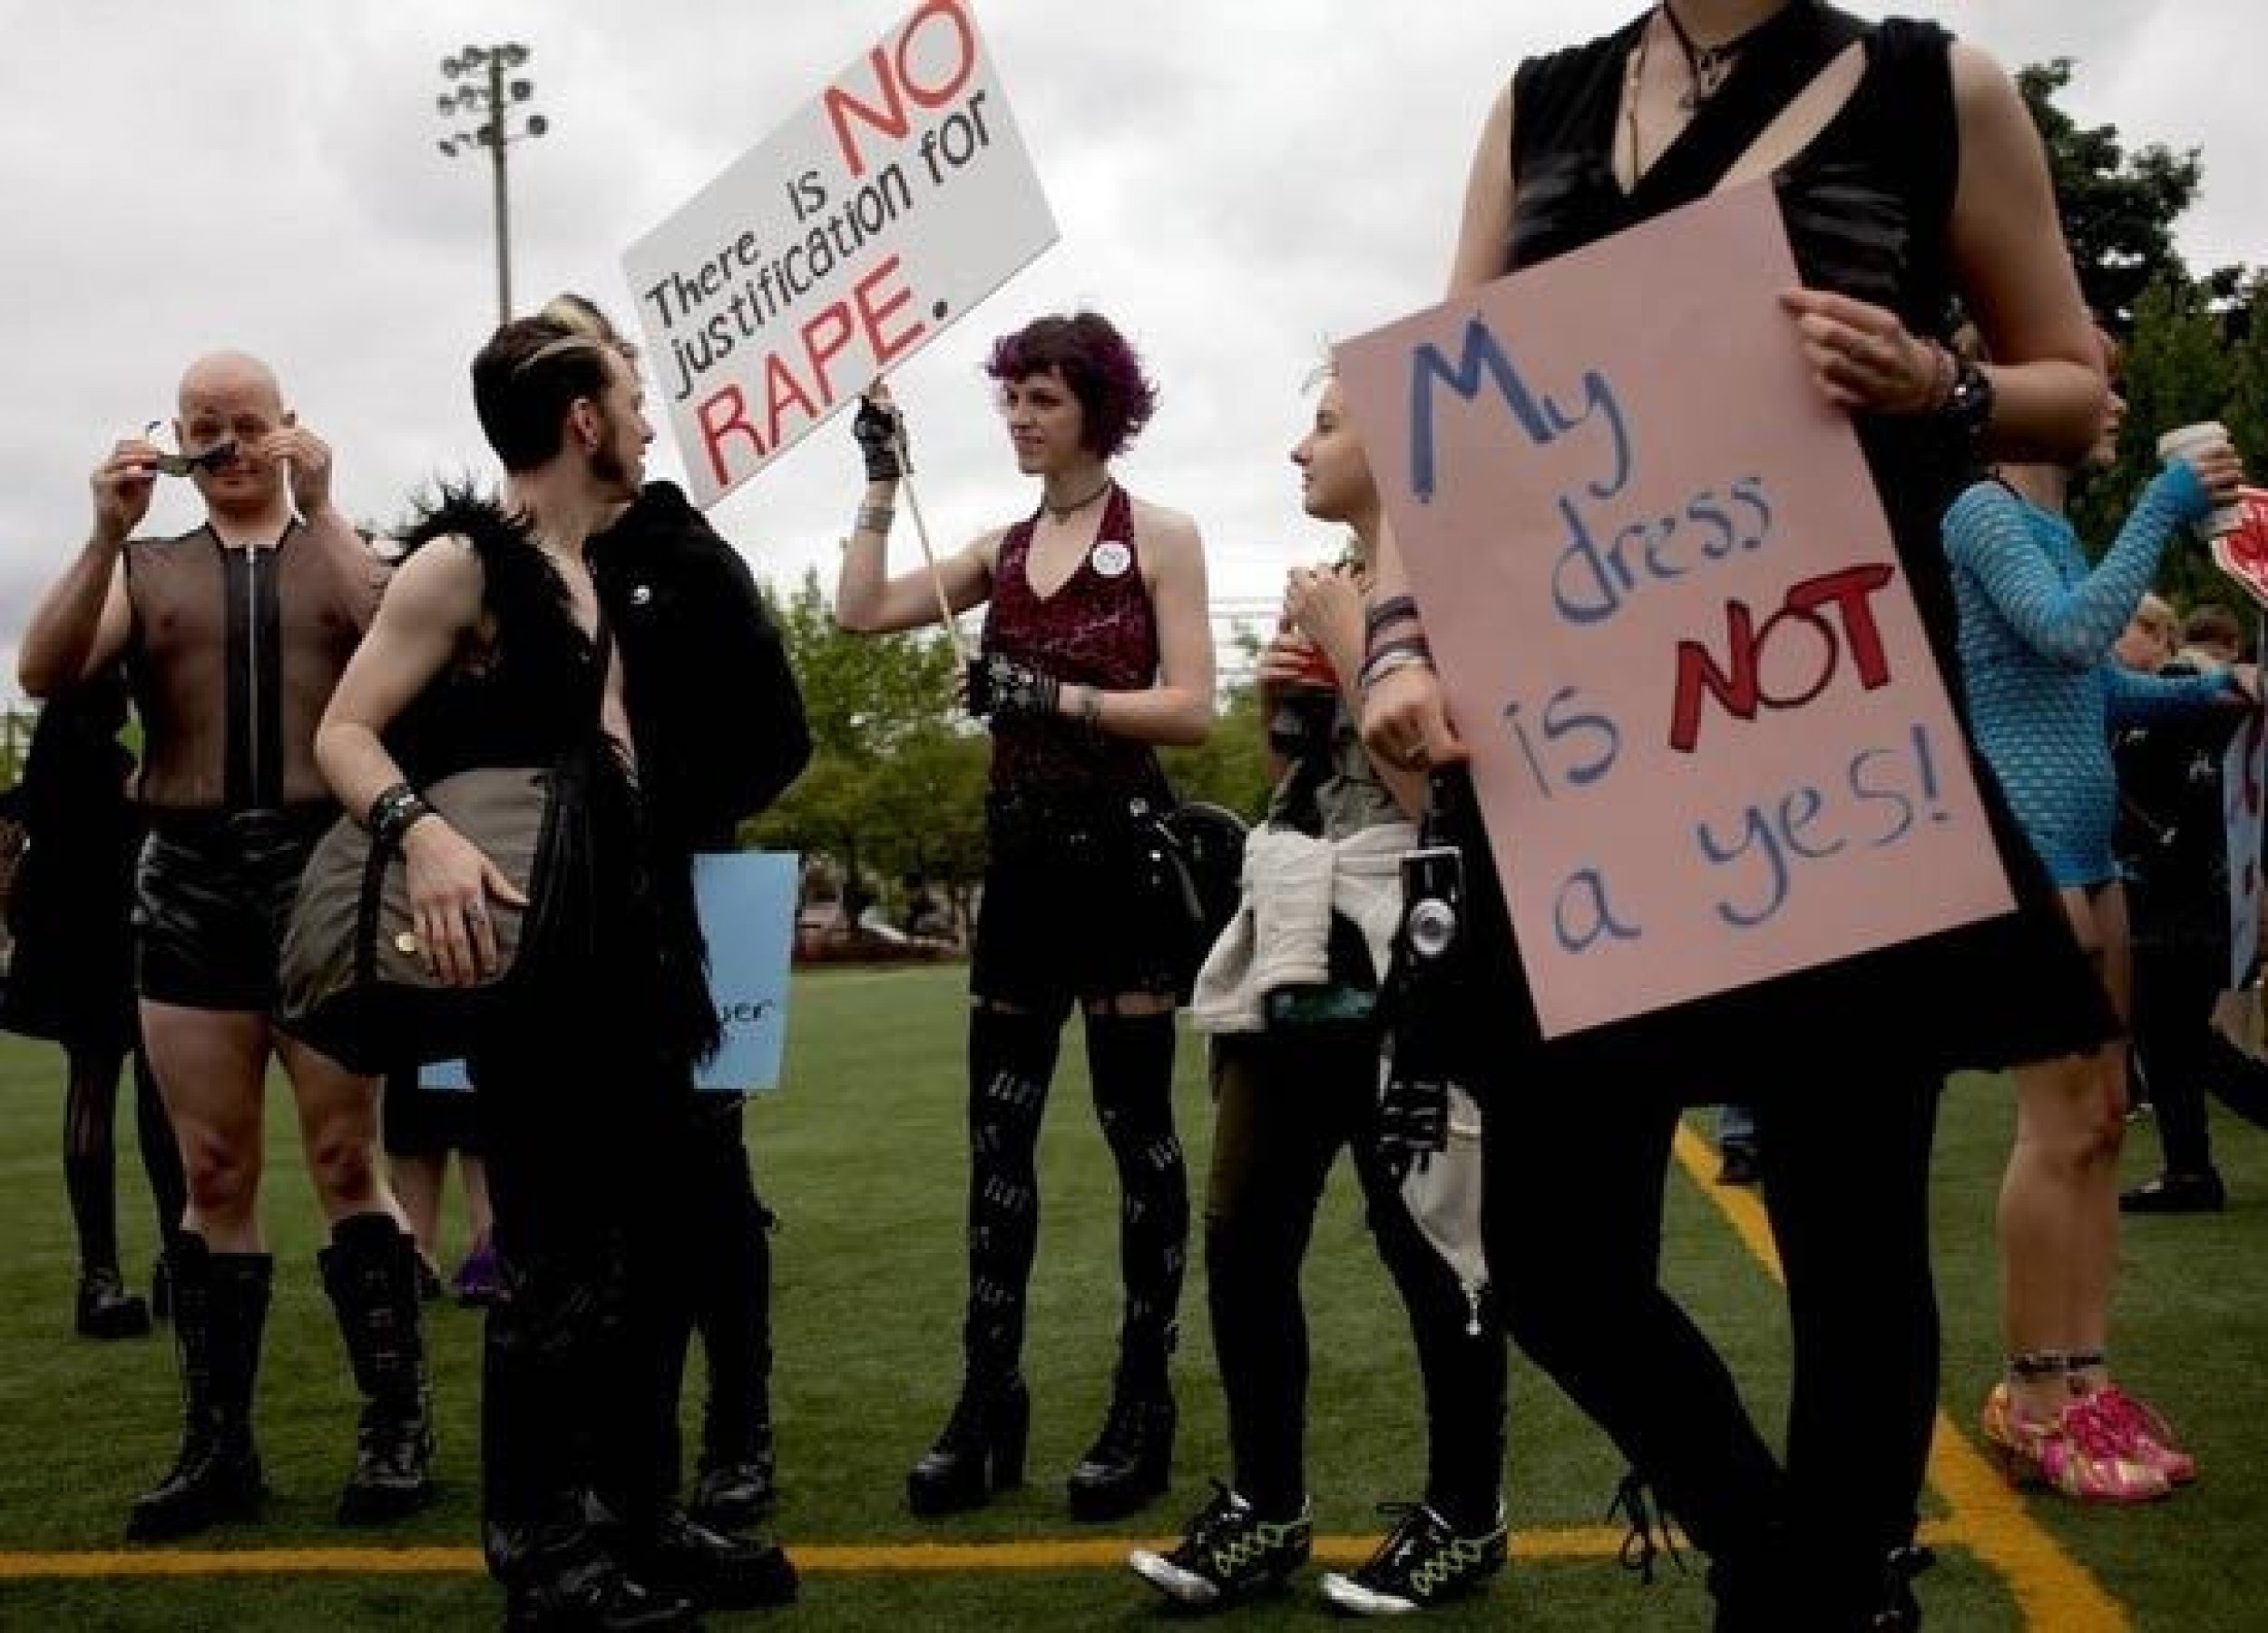 Jessica Drenkel, center with sign, talks with a group before participating in SlutWalk. 